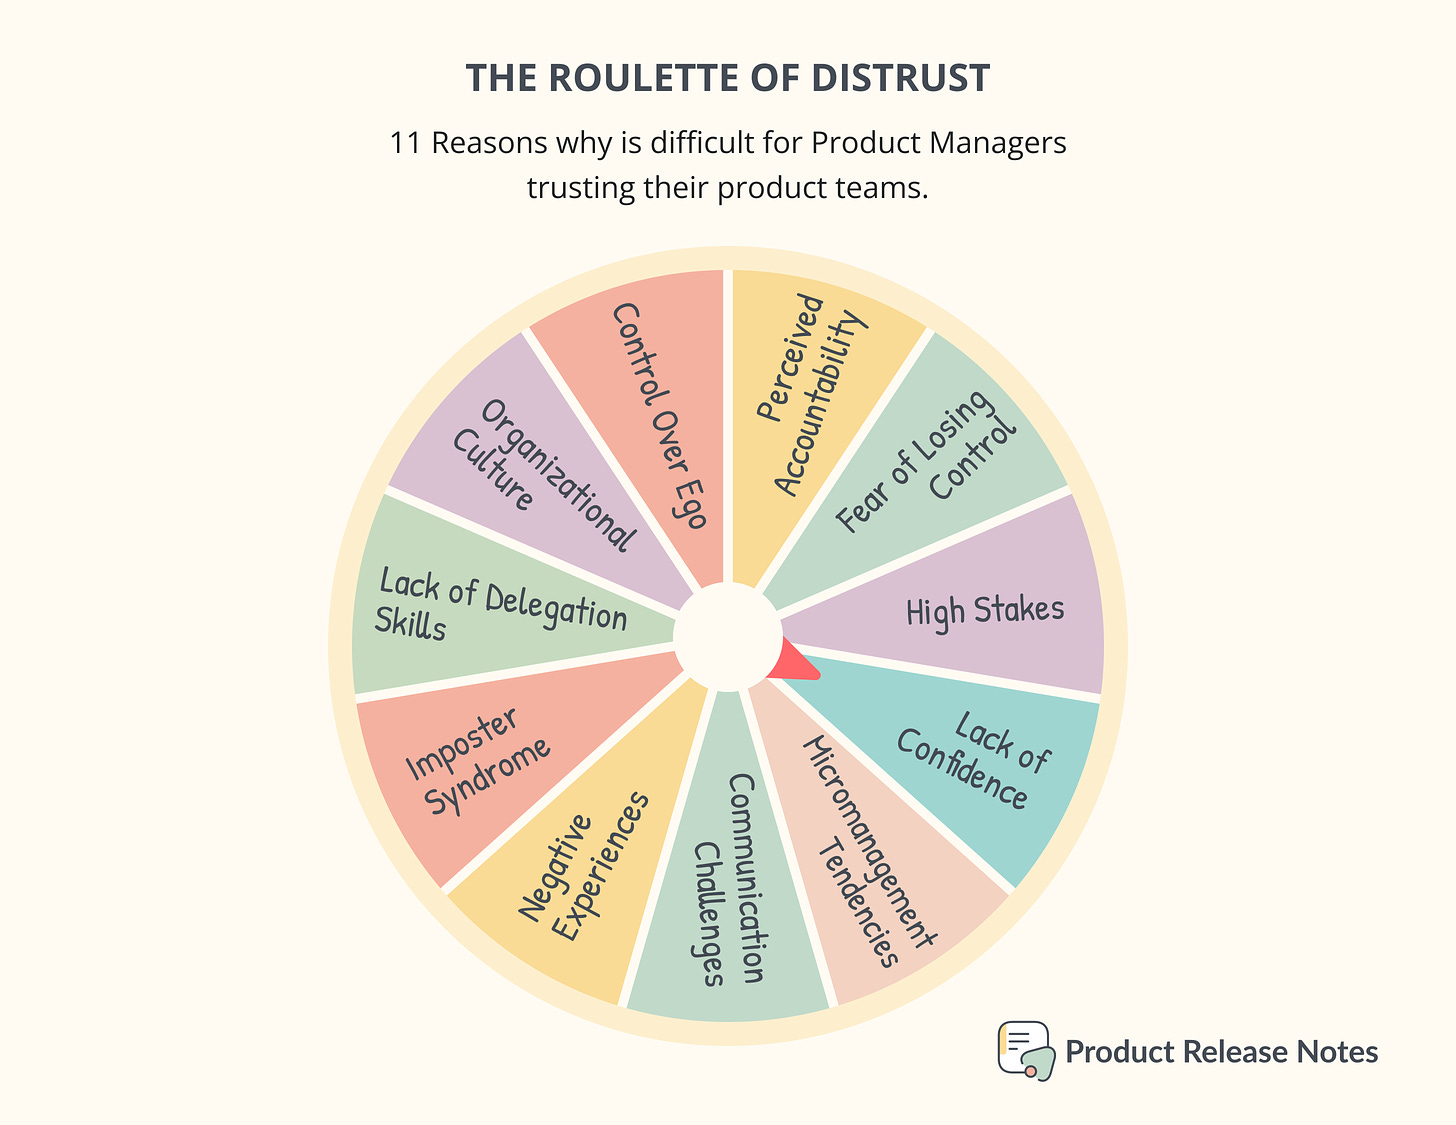 The roulette of distrust or why is hard for PMs to trust in their teams